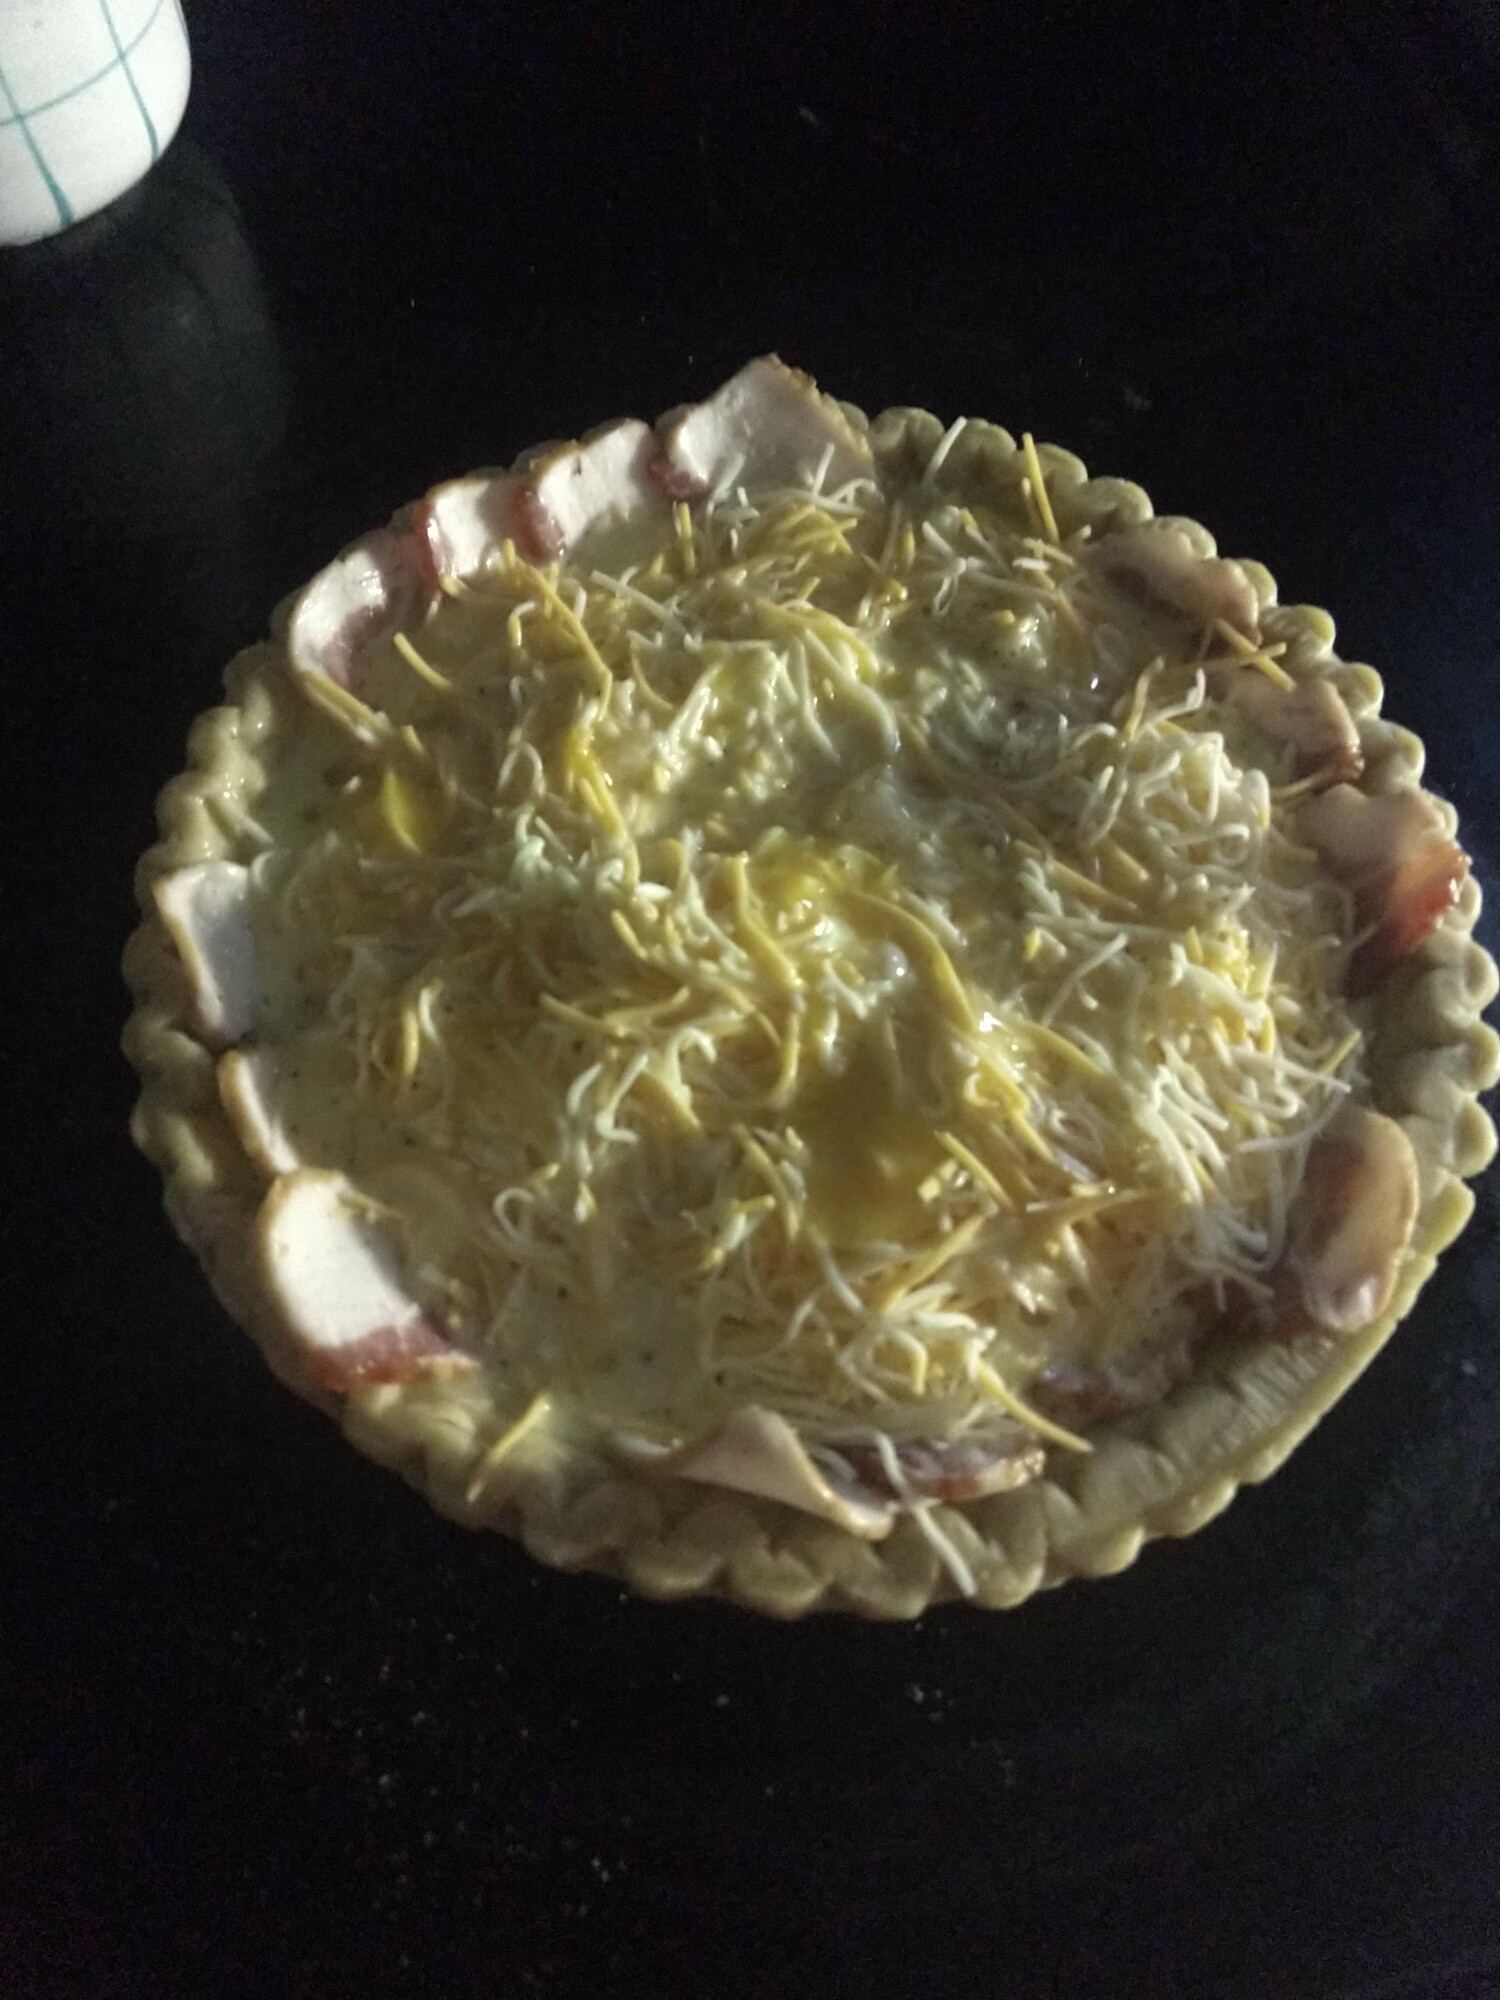 Prepared quiche with shredded cheese on top